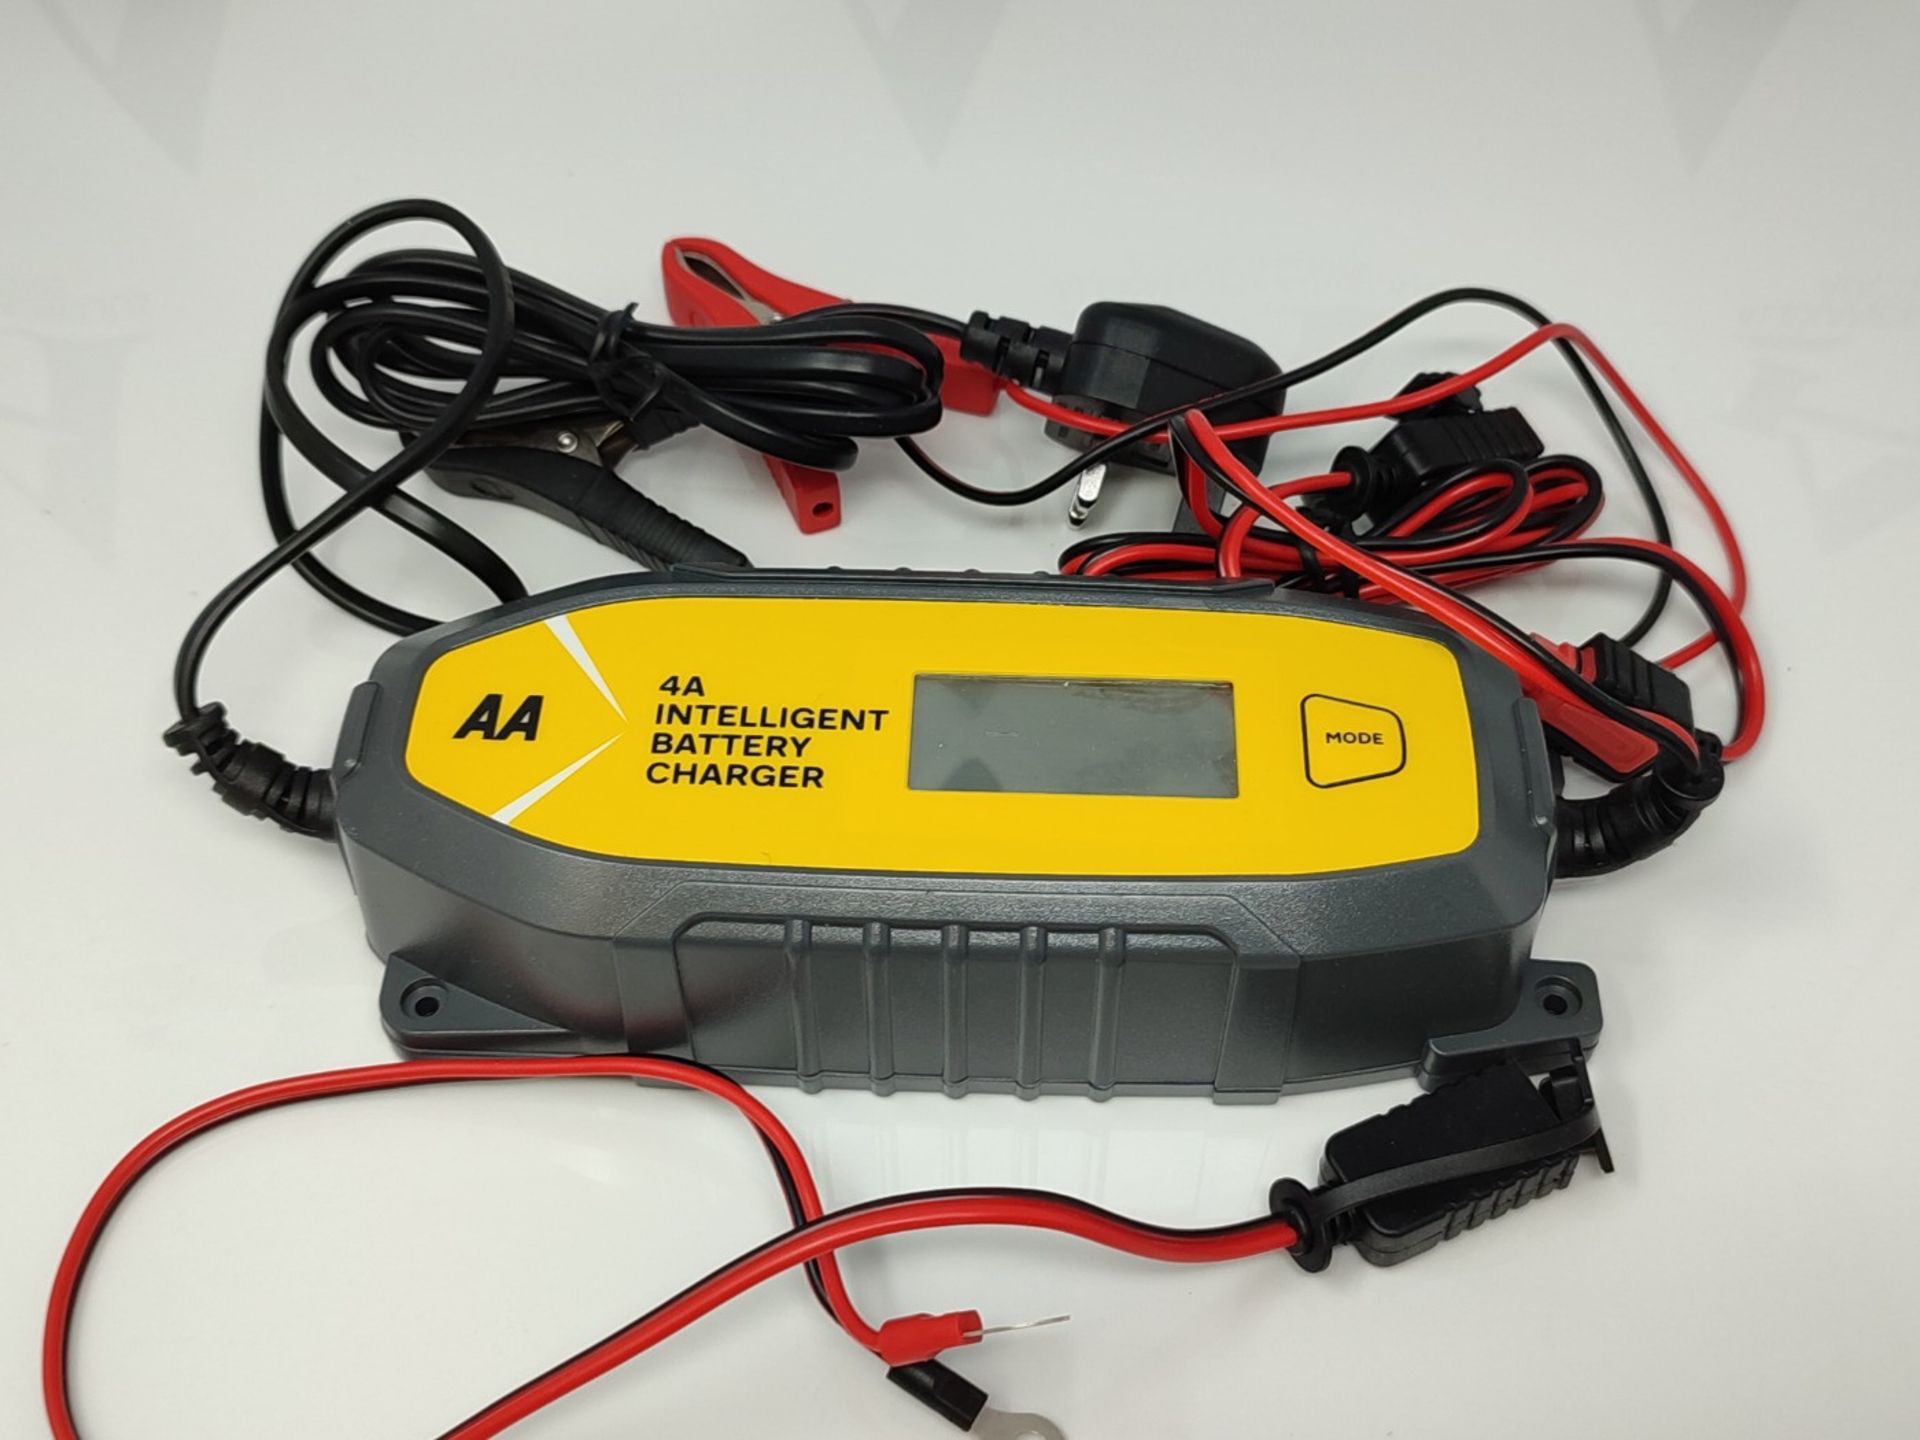 AA AA0725 4A Intelligent Car Battery Charger - LCD,8 Stage, Recover Dead Battery,Up To - Image 3 of 3